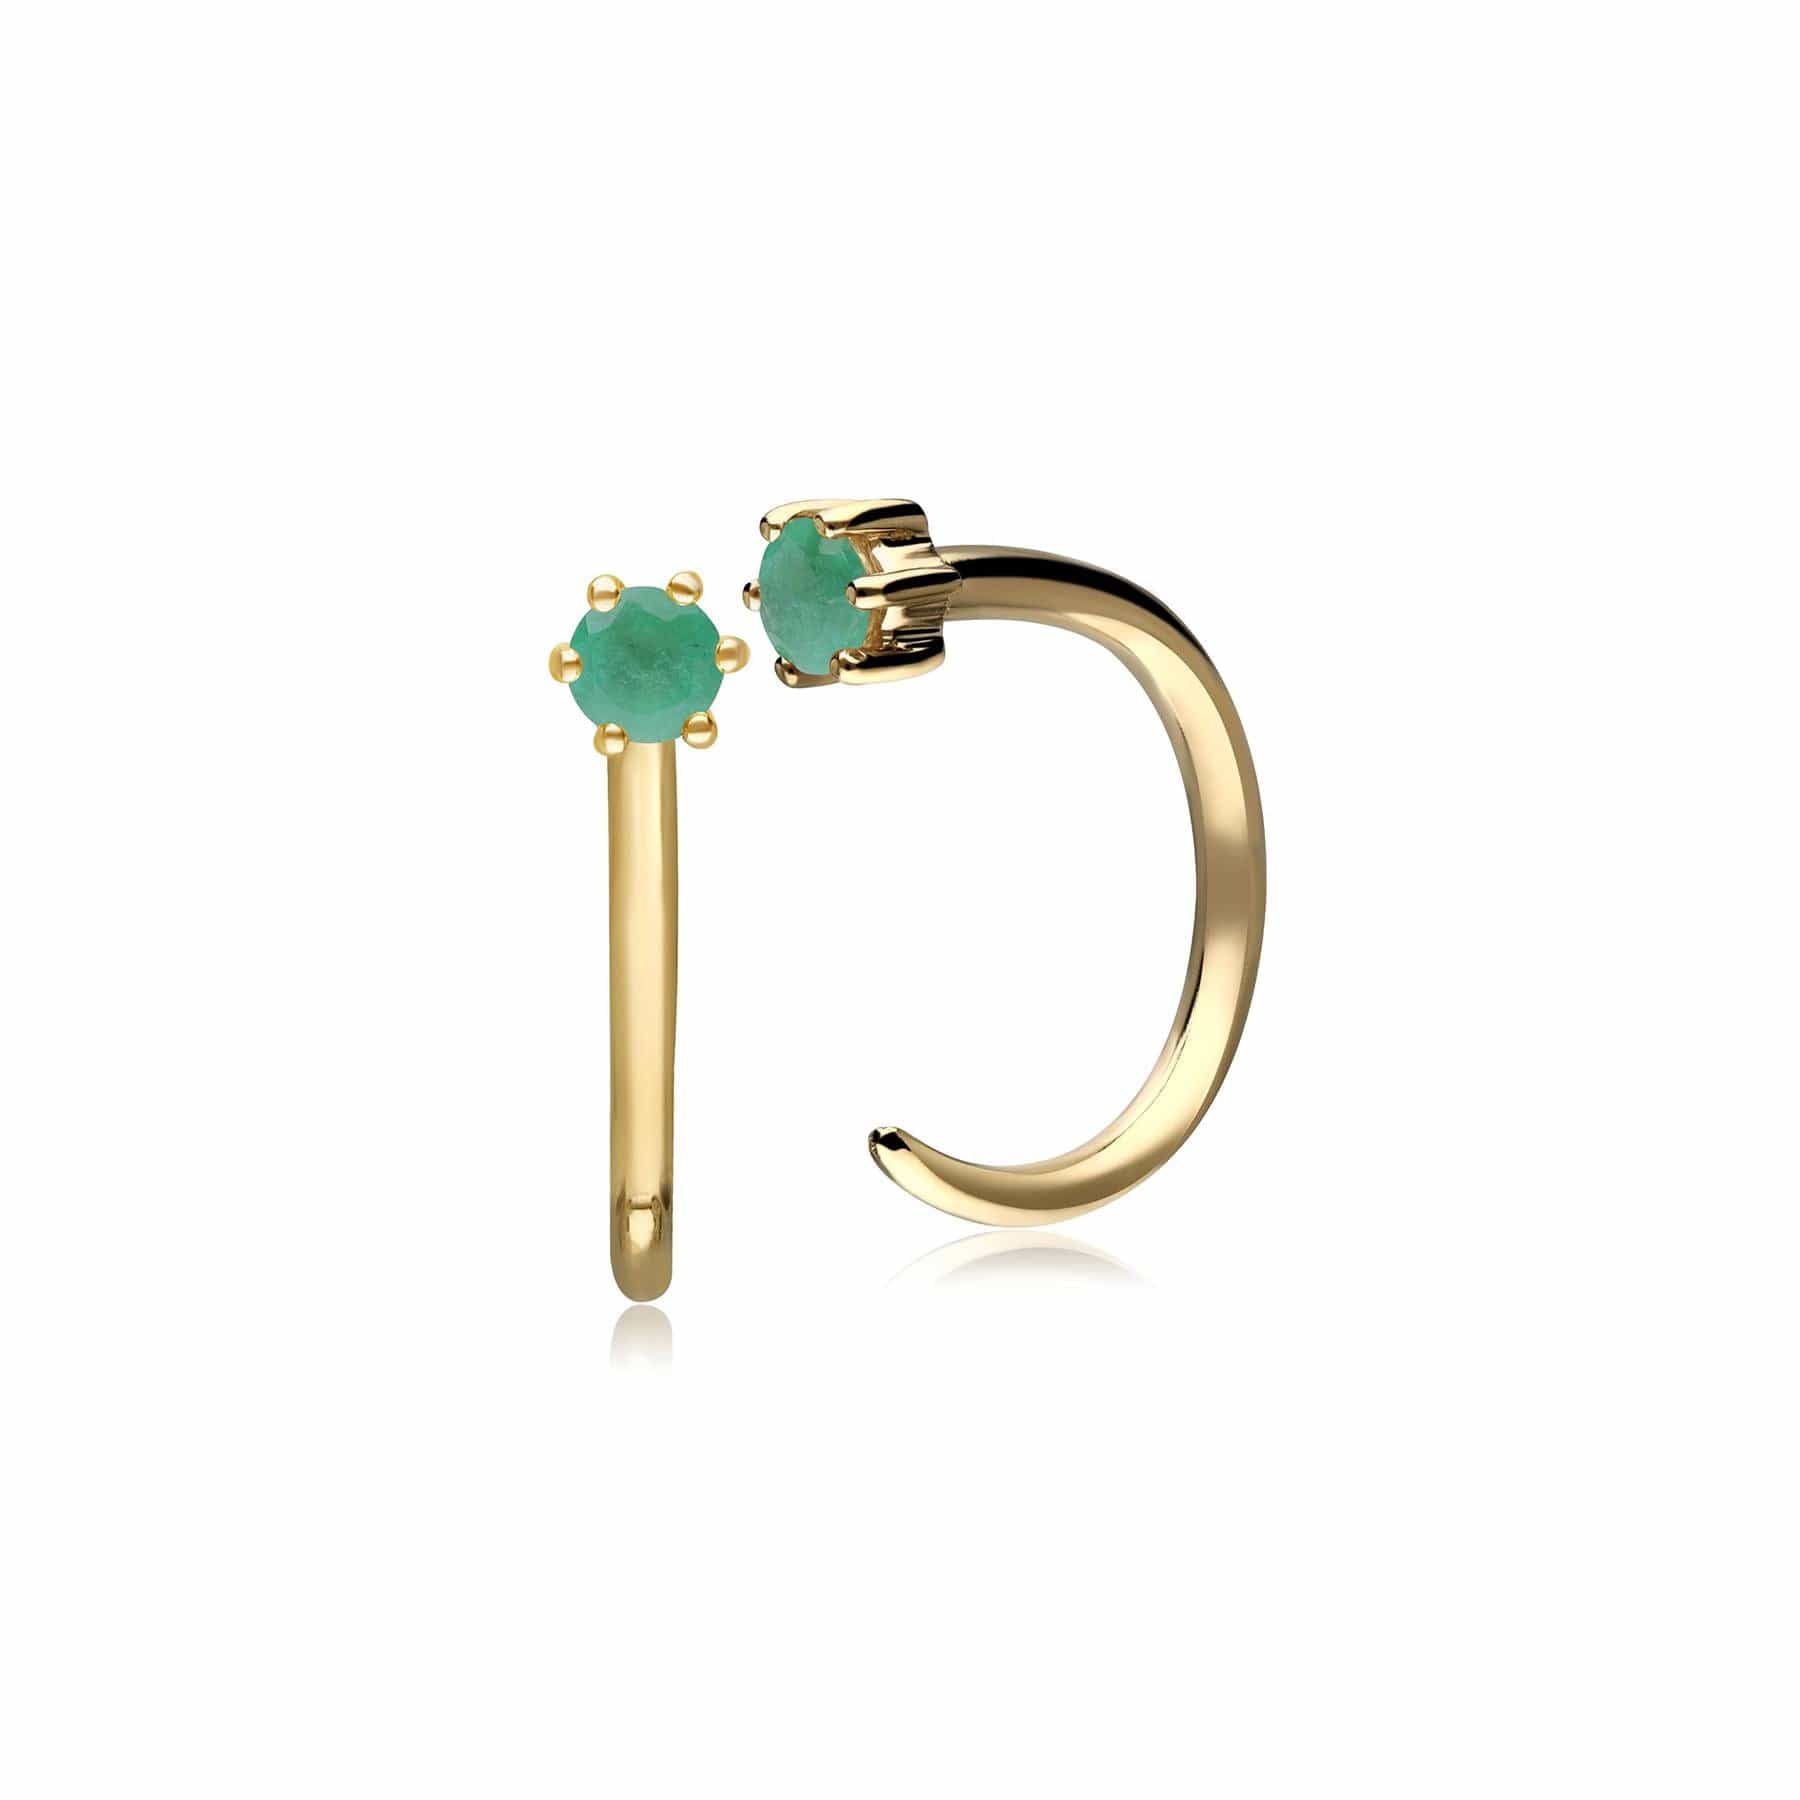 133E4148049 Emerald Pull Through Hoop Earrings in 9ct Yellow Gold 1